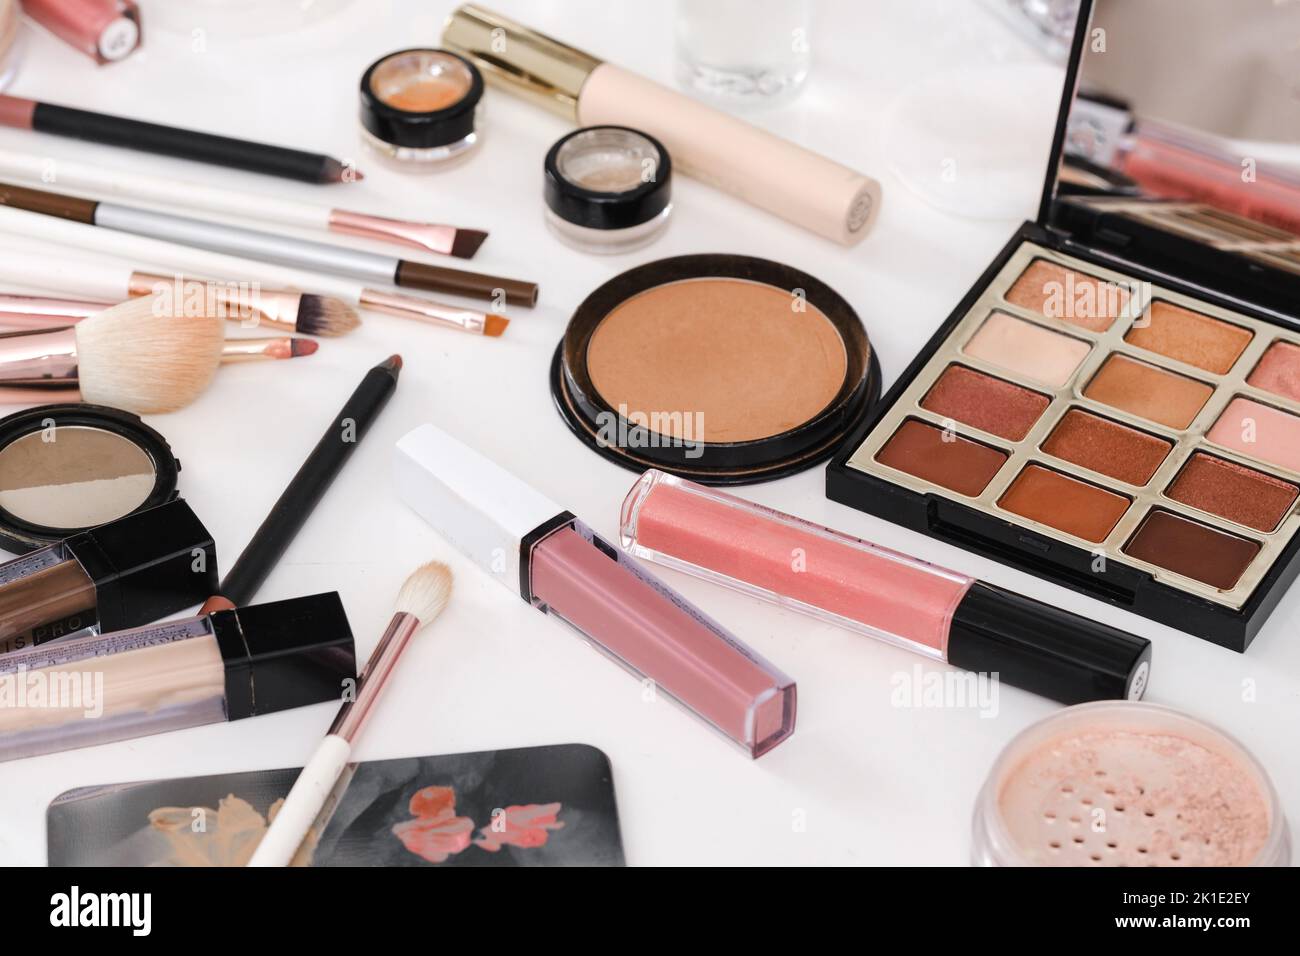 make-up tools and cosmetics on white table. Decorative cosmetics, brushes, eyes shadow, pencils with foundation on dressing table or beauty salon Stock Photo